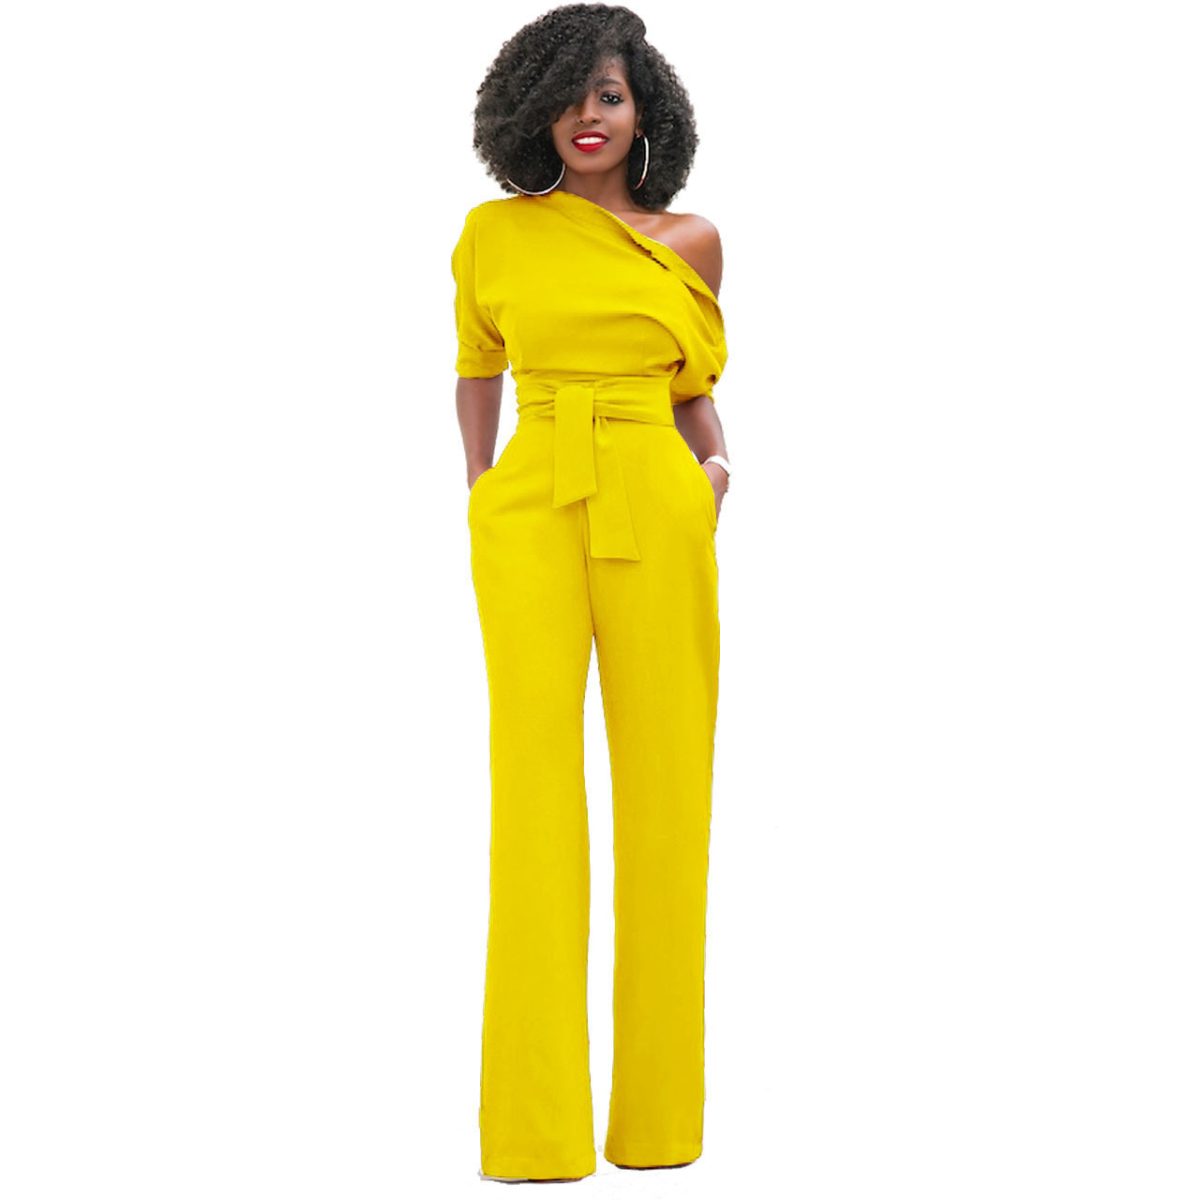 Classic Solid Color Diagonal Collar Button One Piece Wide Leg Jumpsuit in Jumpsuits & Rompers